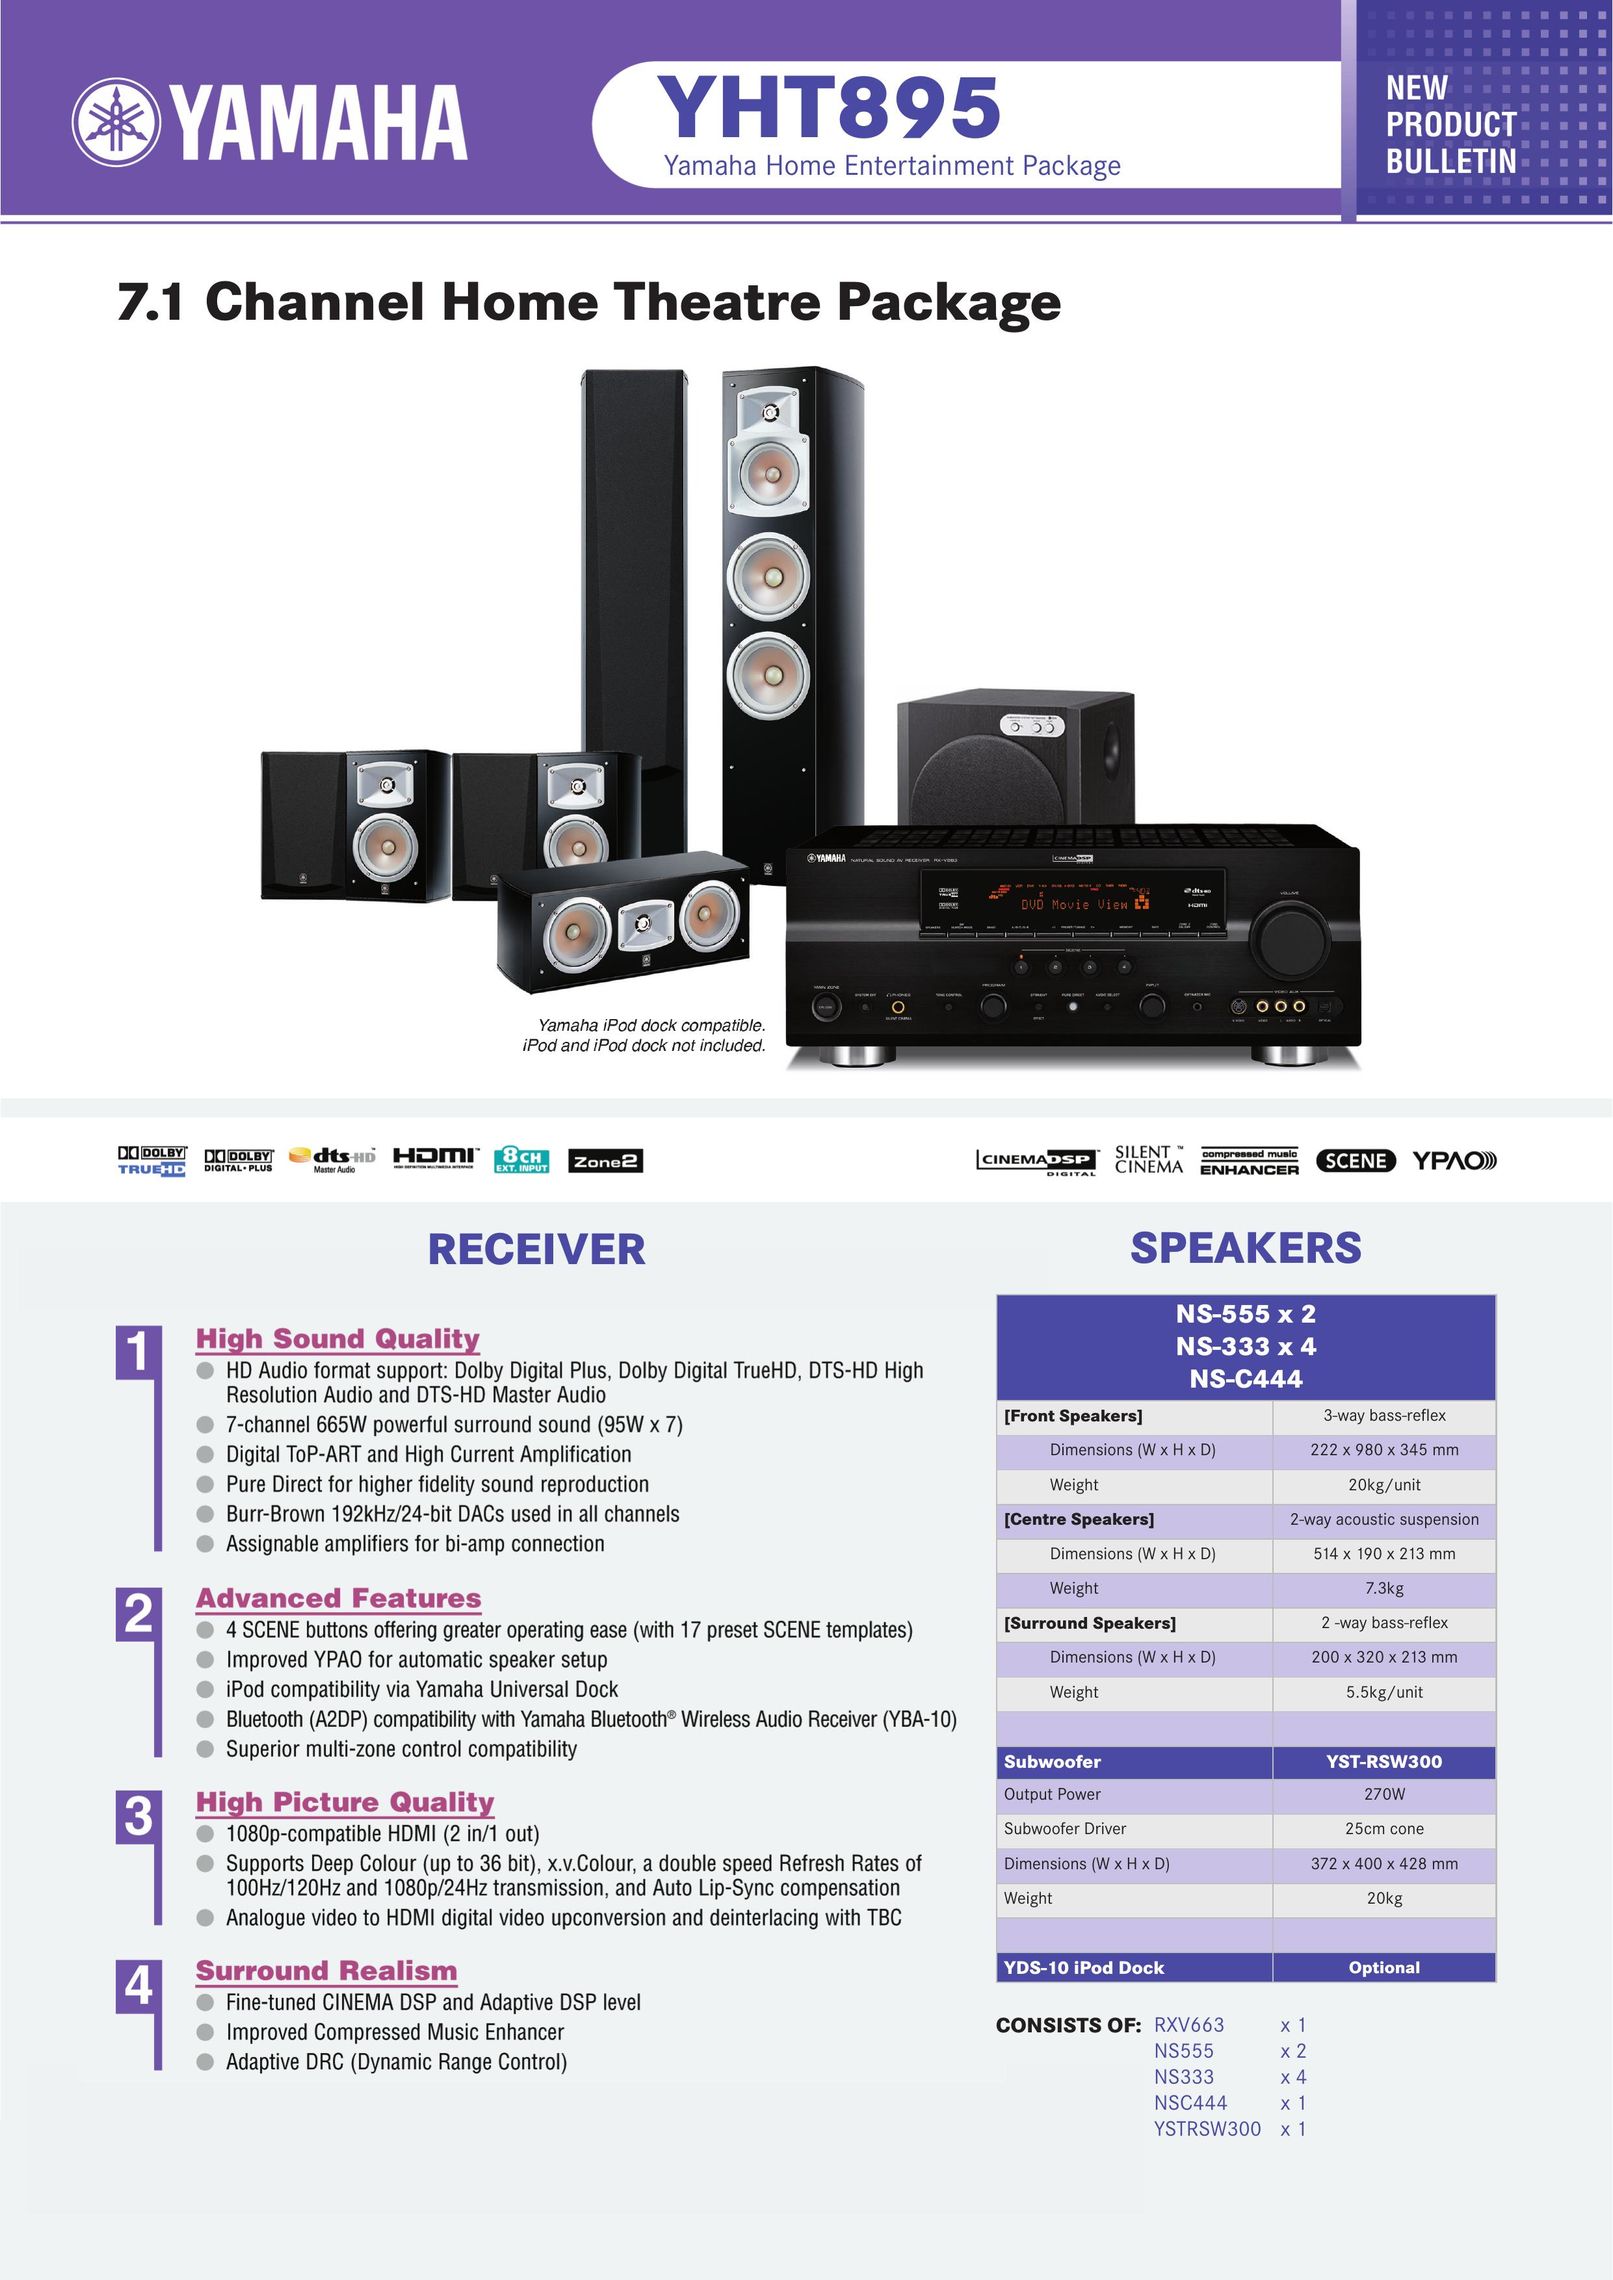 Yamaha YHT895 Home Theater System User Manual